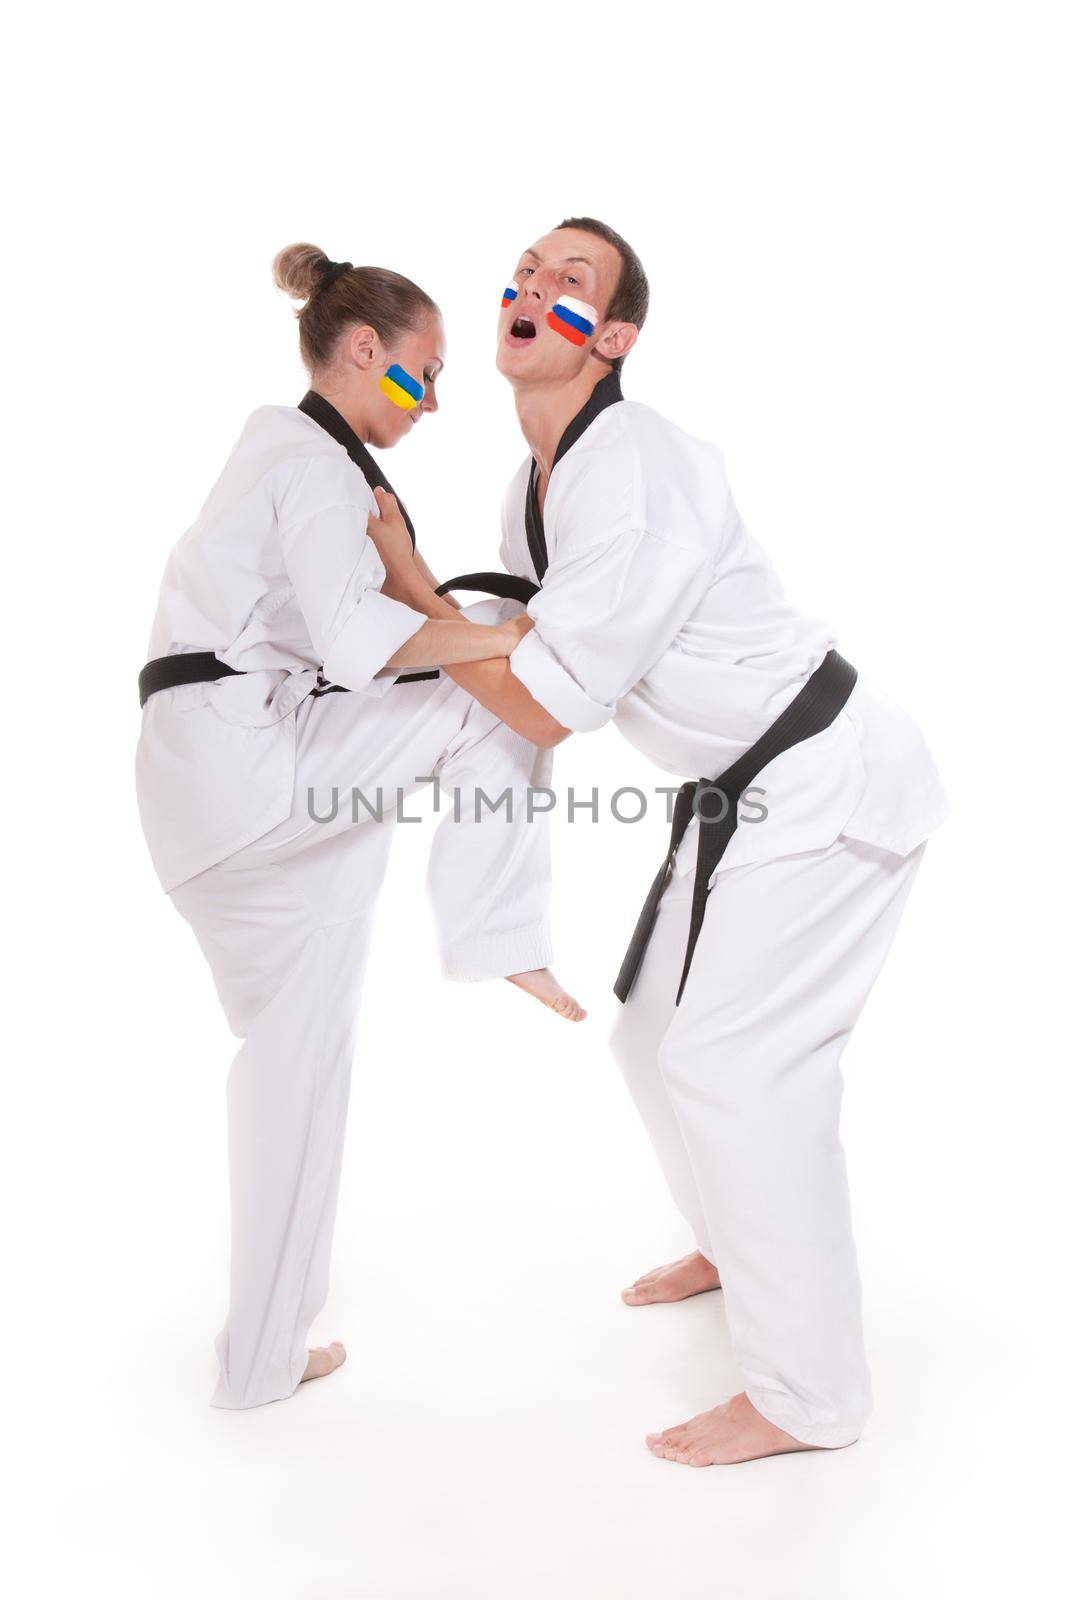 Ukraine representative make kick move on Russia, two fighting representatives of different countries. Woman make ankle kick to a man, two fighting people isolated on white background.